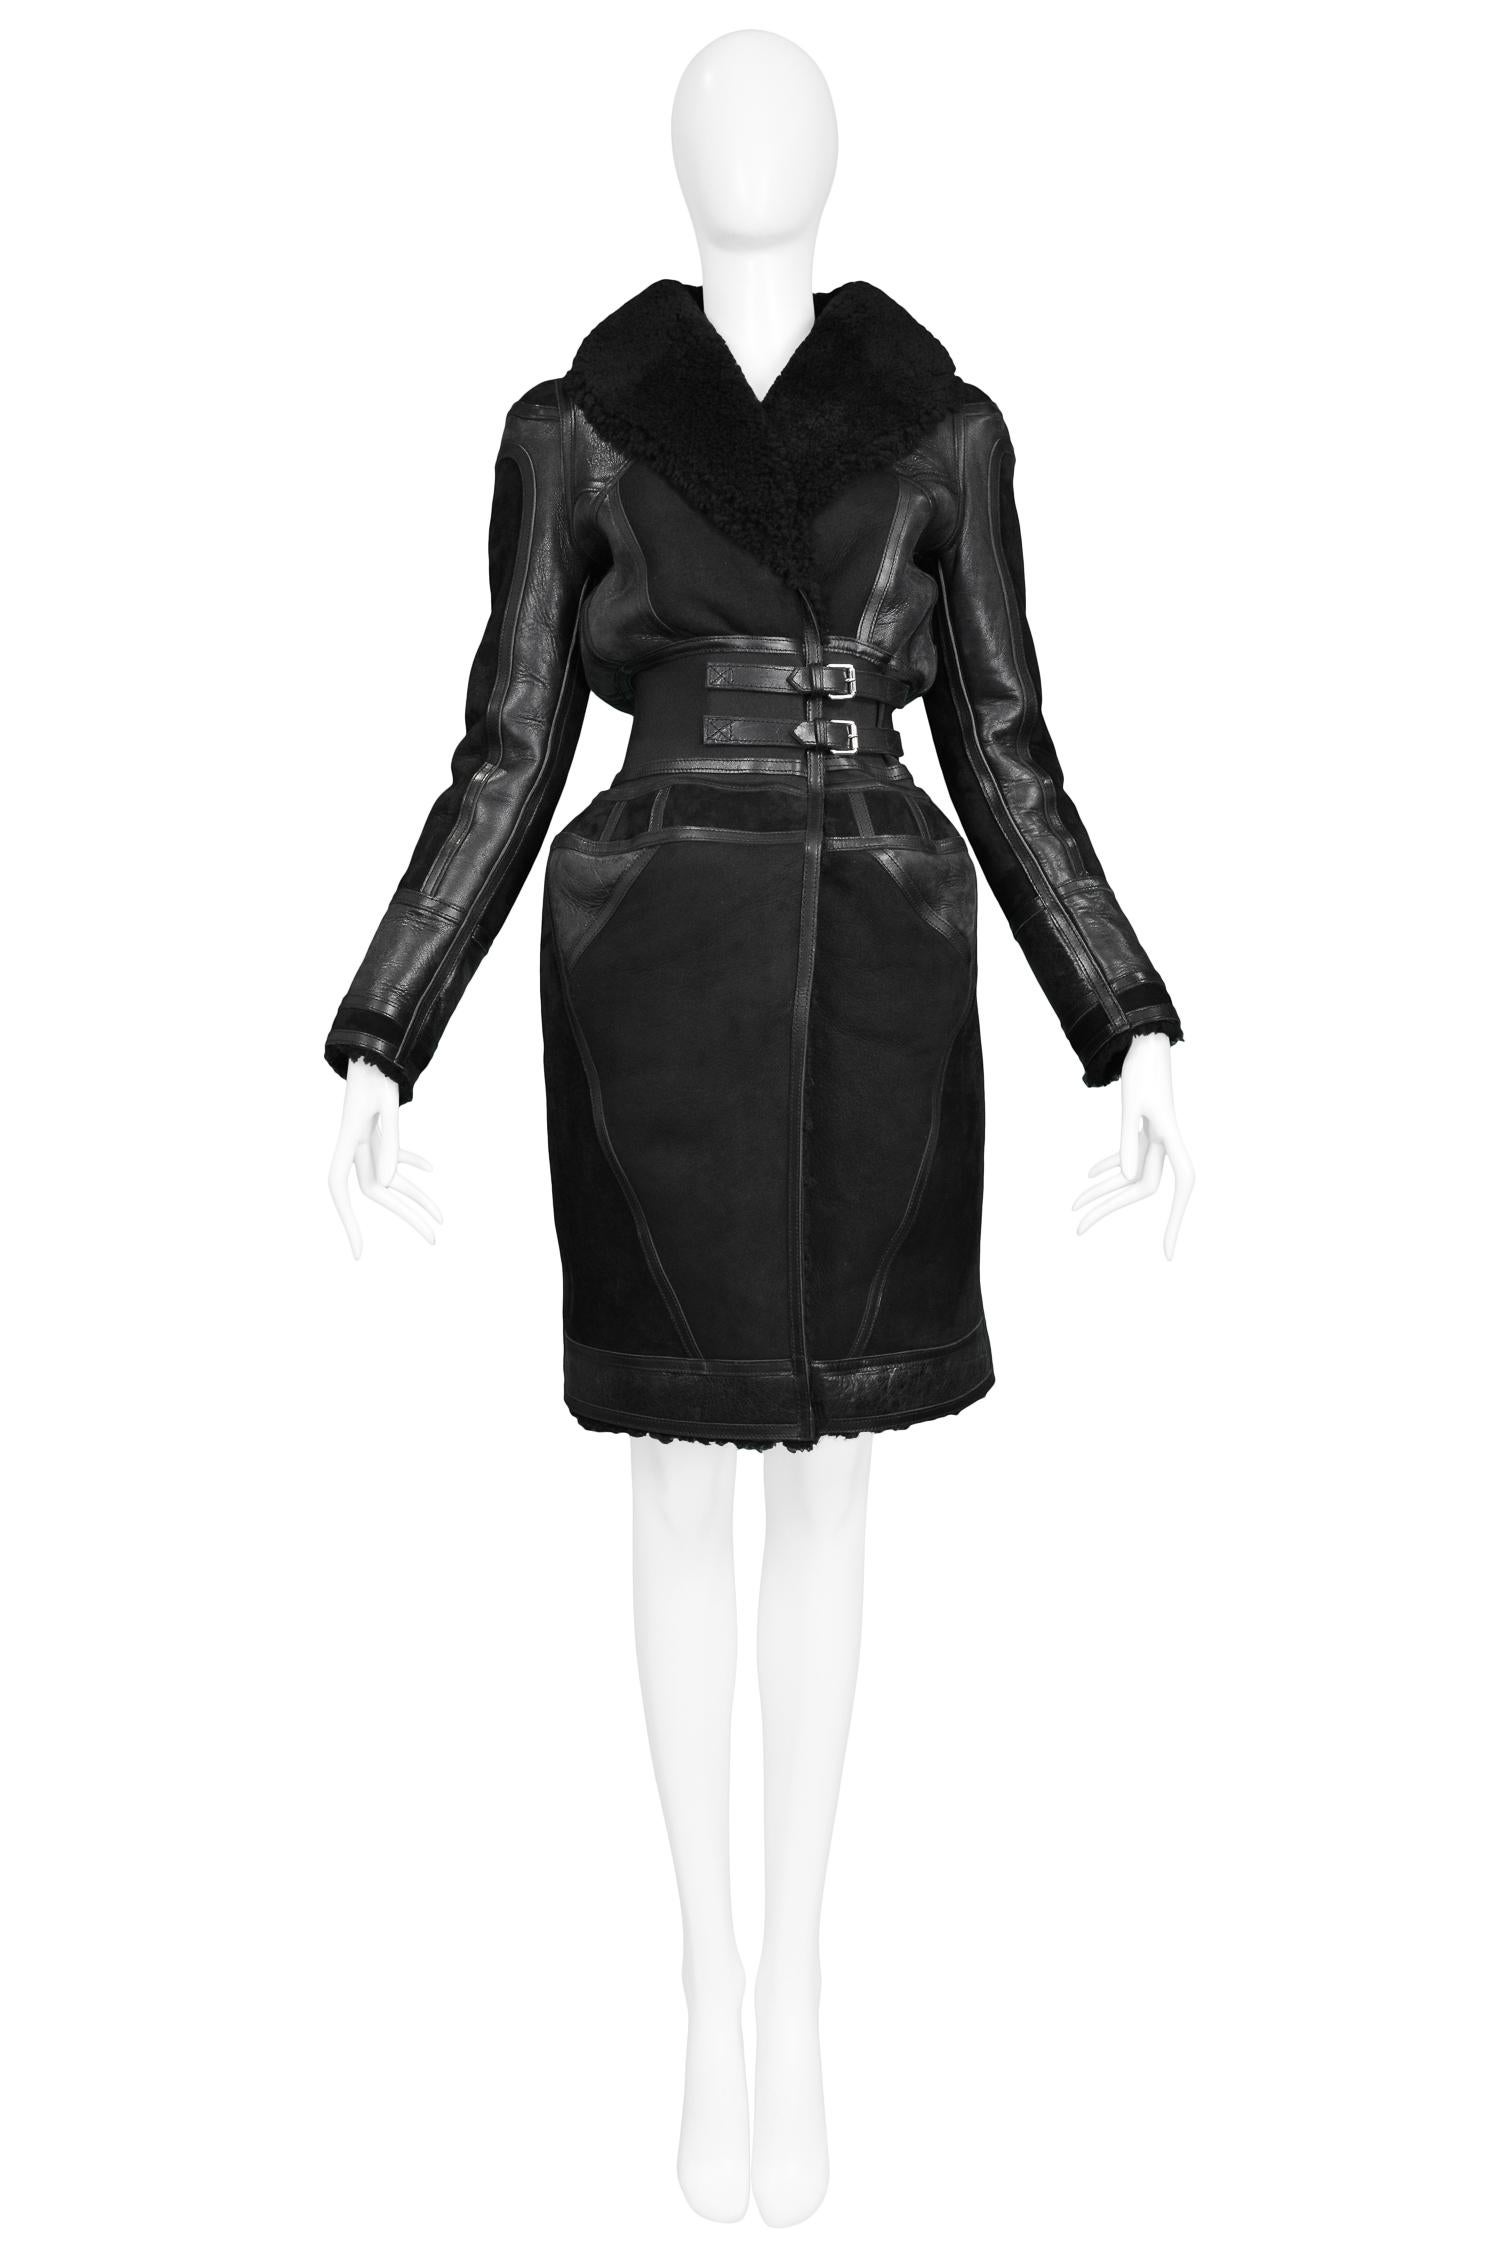 Resurrection Vintage is excited to offer a vintage Nicolas Ghesquière for Balenciaga black suede corset coat featuring black tonal leather panels, shearling collar and lining, an elastic waist with double belted detail and an exaggerated